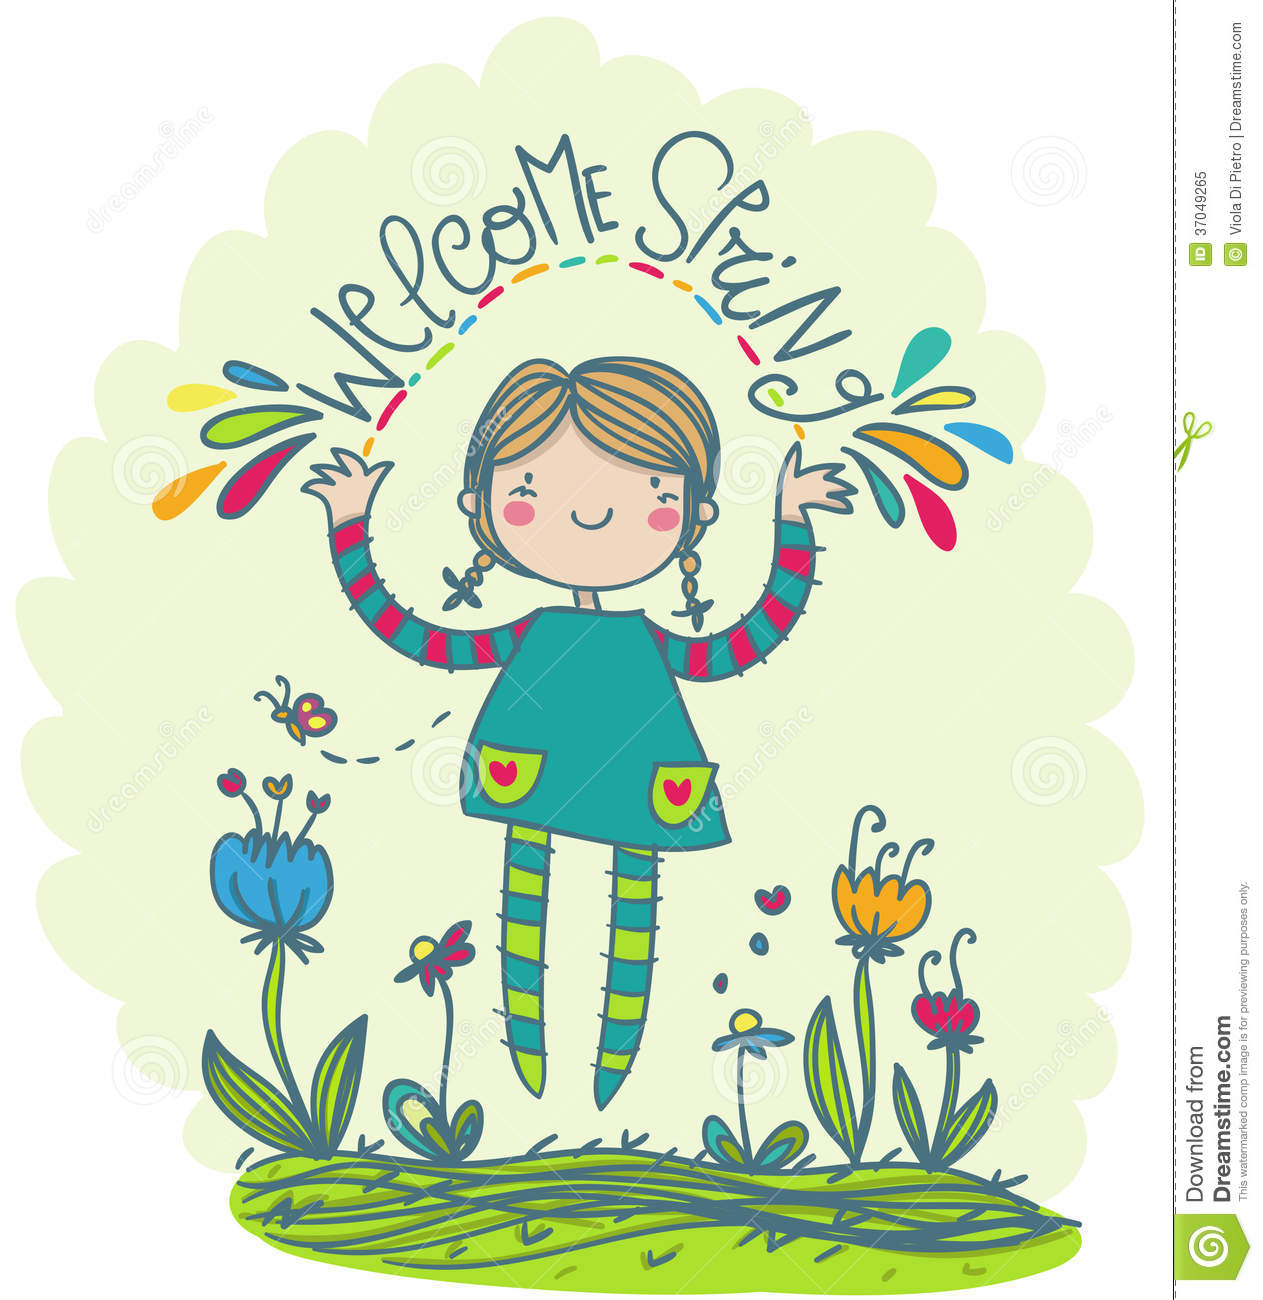 Welcome Spring Funny Illustration Royalty Free Stock Photo   Image